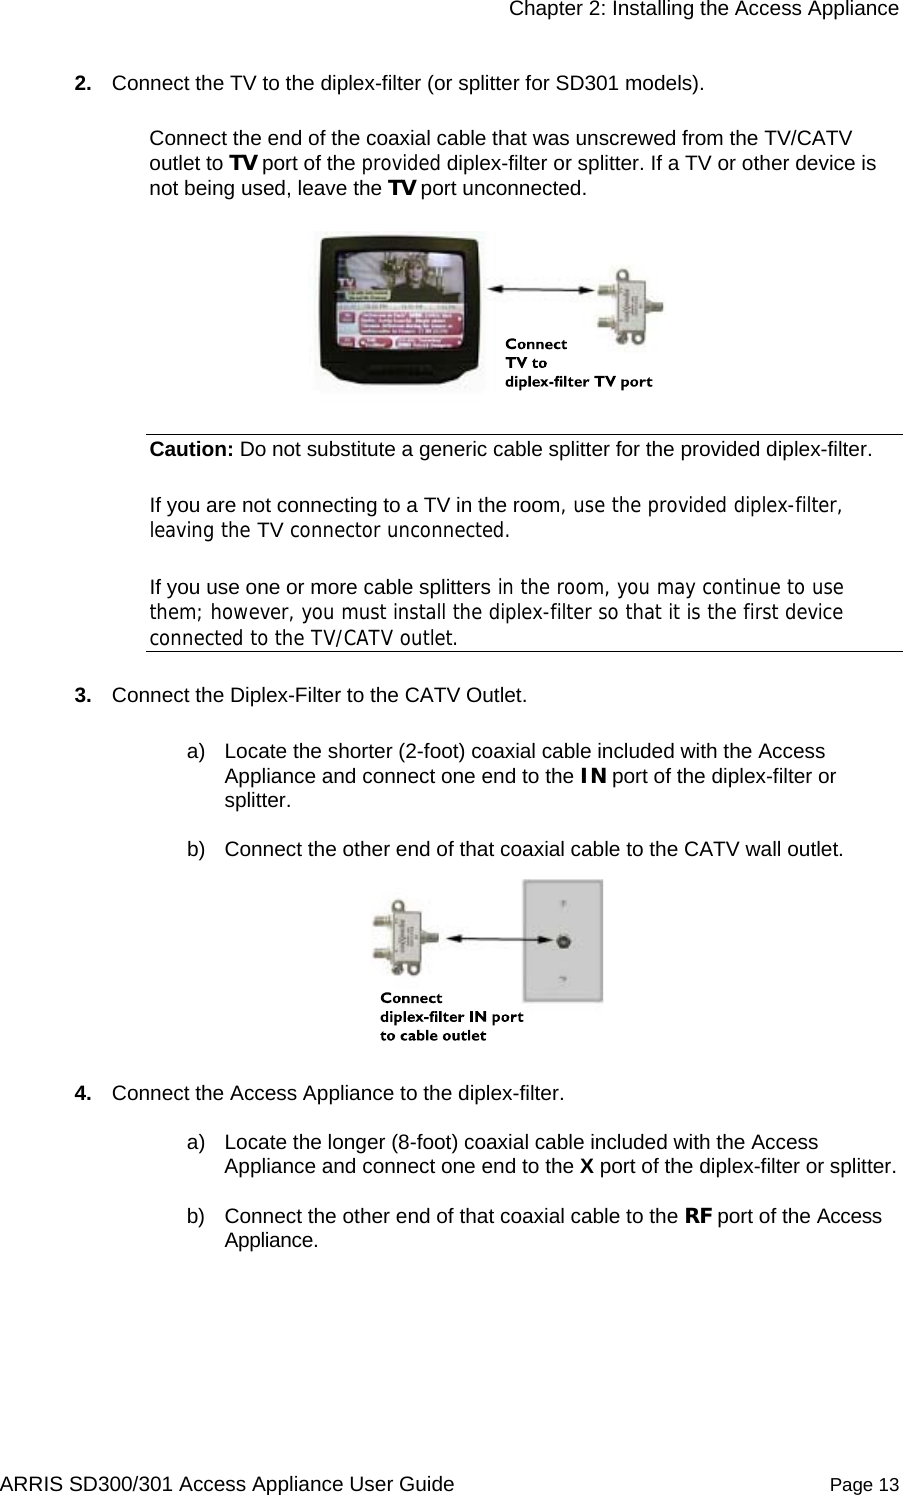     Chapter 2: Installing the Access Appliance  ARRIS SD300/301 Access Appliance User Guide  Page 13 2.  Connect the TV to the diplex-filter (or splitter for SD301 models).  Connect the end of the coaxial cable that was unscrewed from the TV/CATV outlet to TV port of the provided diplex-filter or splitter. If a TV or other device is not being used, leave the TV port unconnected.   Caution: Do not substitute a generic cable splitter for the provided diplex-filter.  If you are not connecting to a TV in the room, use the provided diplex-filter, leaving the TV connector unconnected.  If you use one or more cable splitters in the room, you may continue to use them; however, you must install the diplex-filter so that it is the first device connected to the TV/CATV outlet. 3.  Connect the Diplex-Filter to the CATV Outlet.  a)  Locate the shorter (2-foot) coaxial cable included with the Access Appliance and connect one end to the IN port of the diplex-filter or splitter.  b)  Connect the other end of that coaxial cable to the CATV wall outlet.   4.  Connect the Access Appliance to the diplex-filter.  a)  Locate the longer (8-foot) coaxial cable included with the Access Appliance and connect one end to the X port of the diplex-filter or splitter. b)  Connect the other end of that coaxial cable to the RF port of the Access Appliance.  